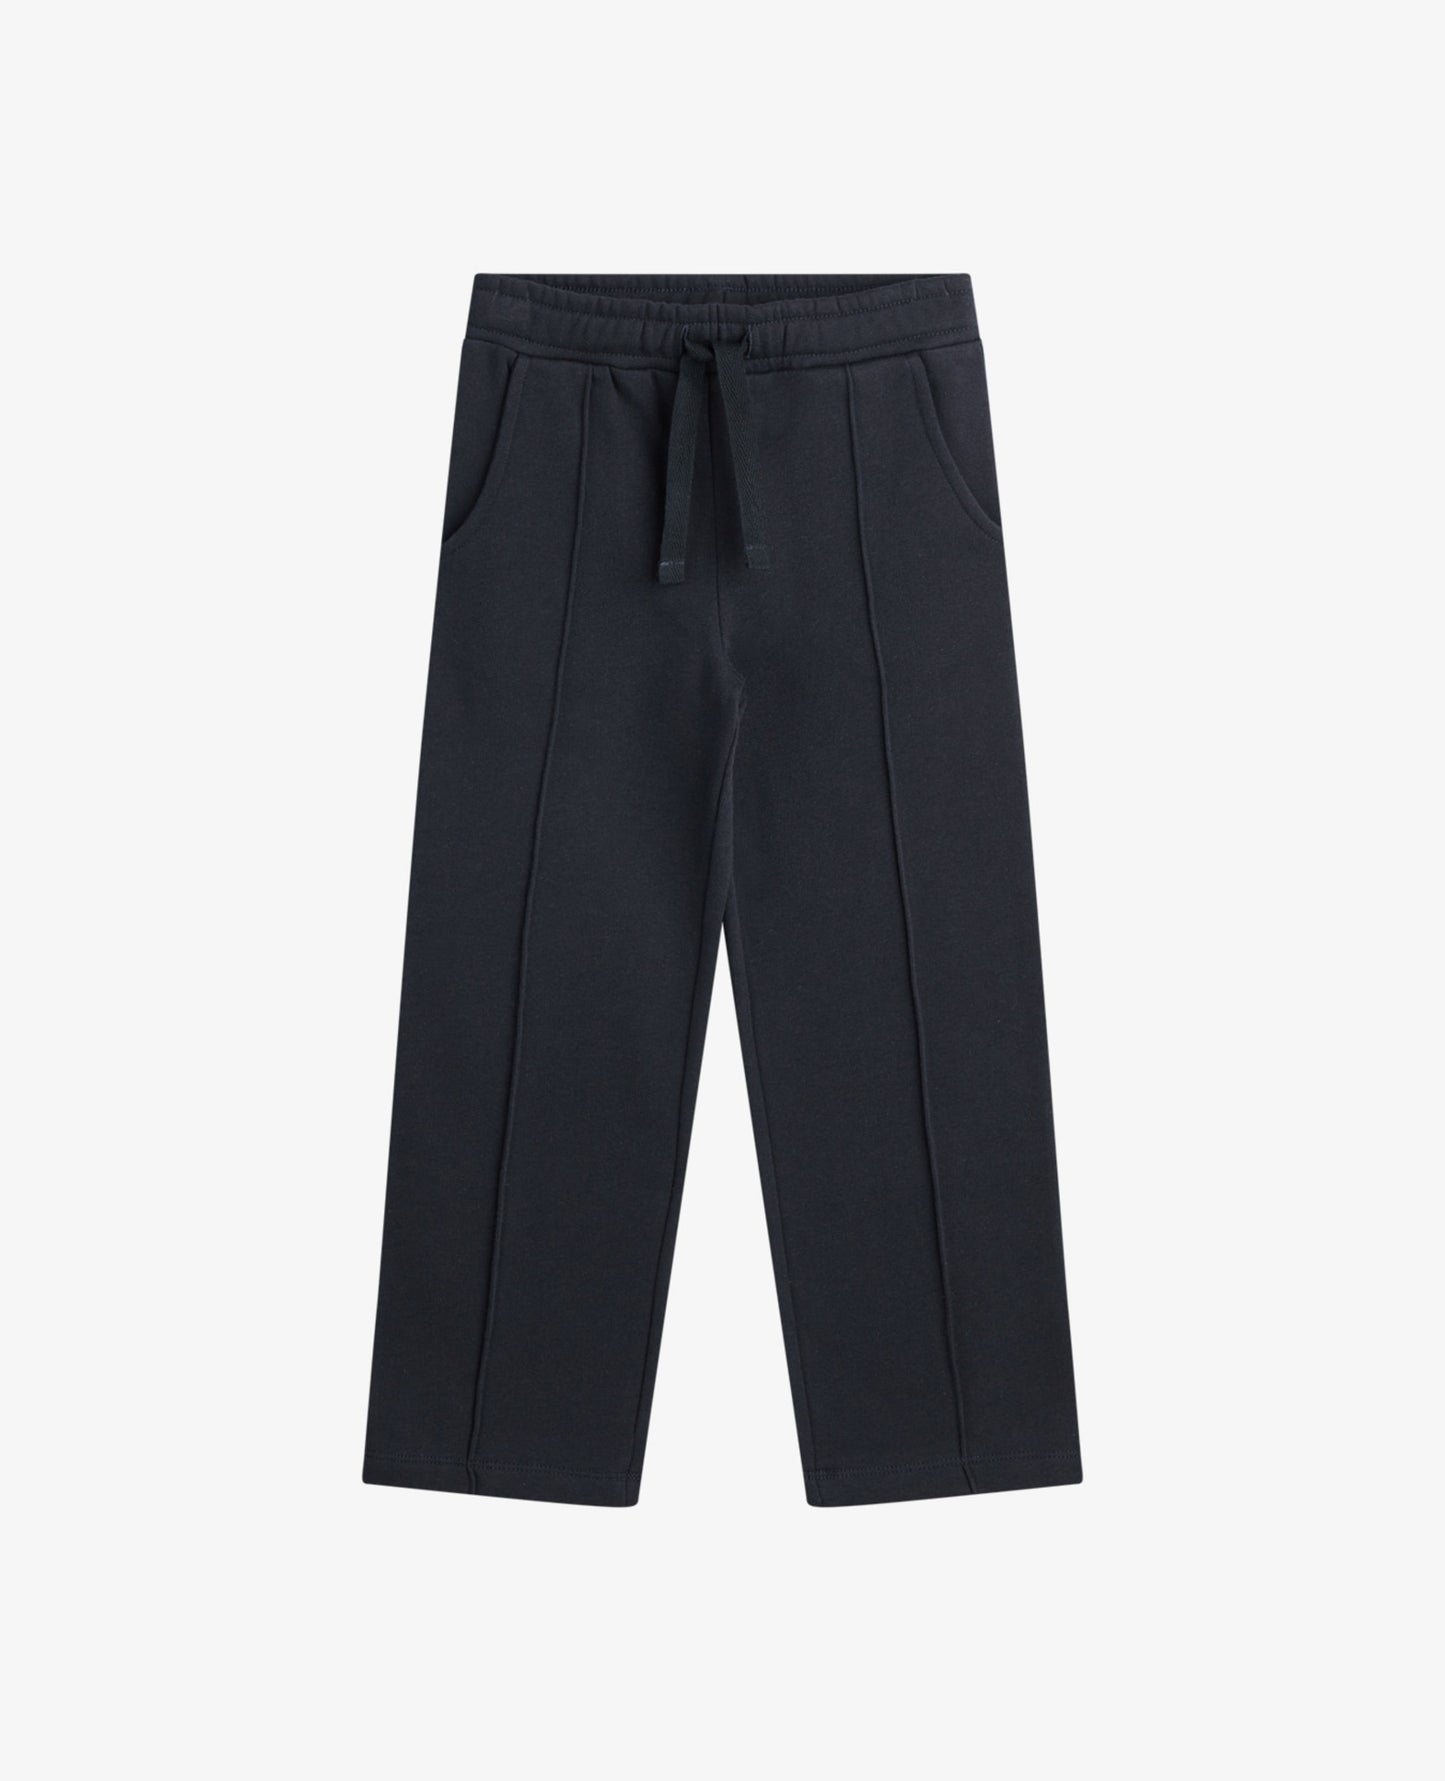 FLORANNM JERSEY TROUSERS